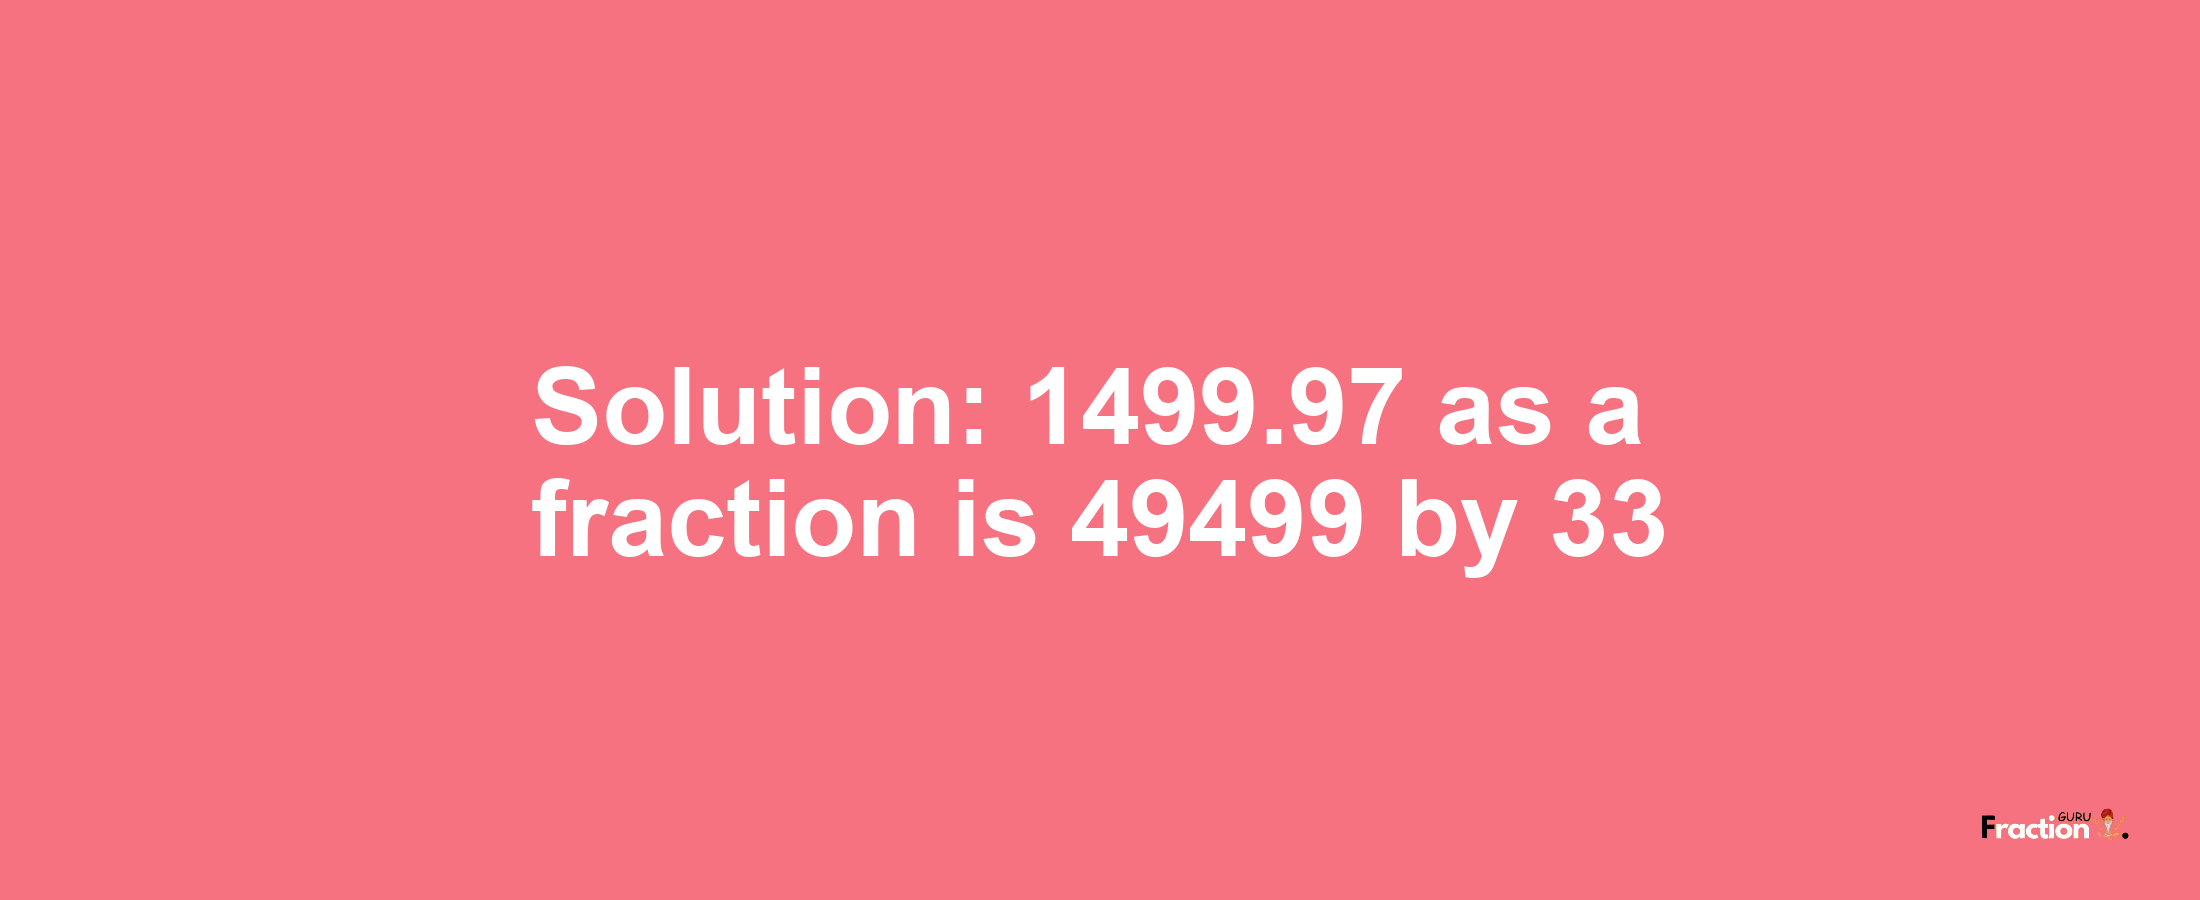 Solution:1499.97 as a fraction is 49499/33